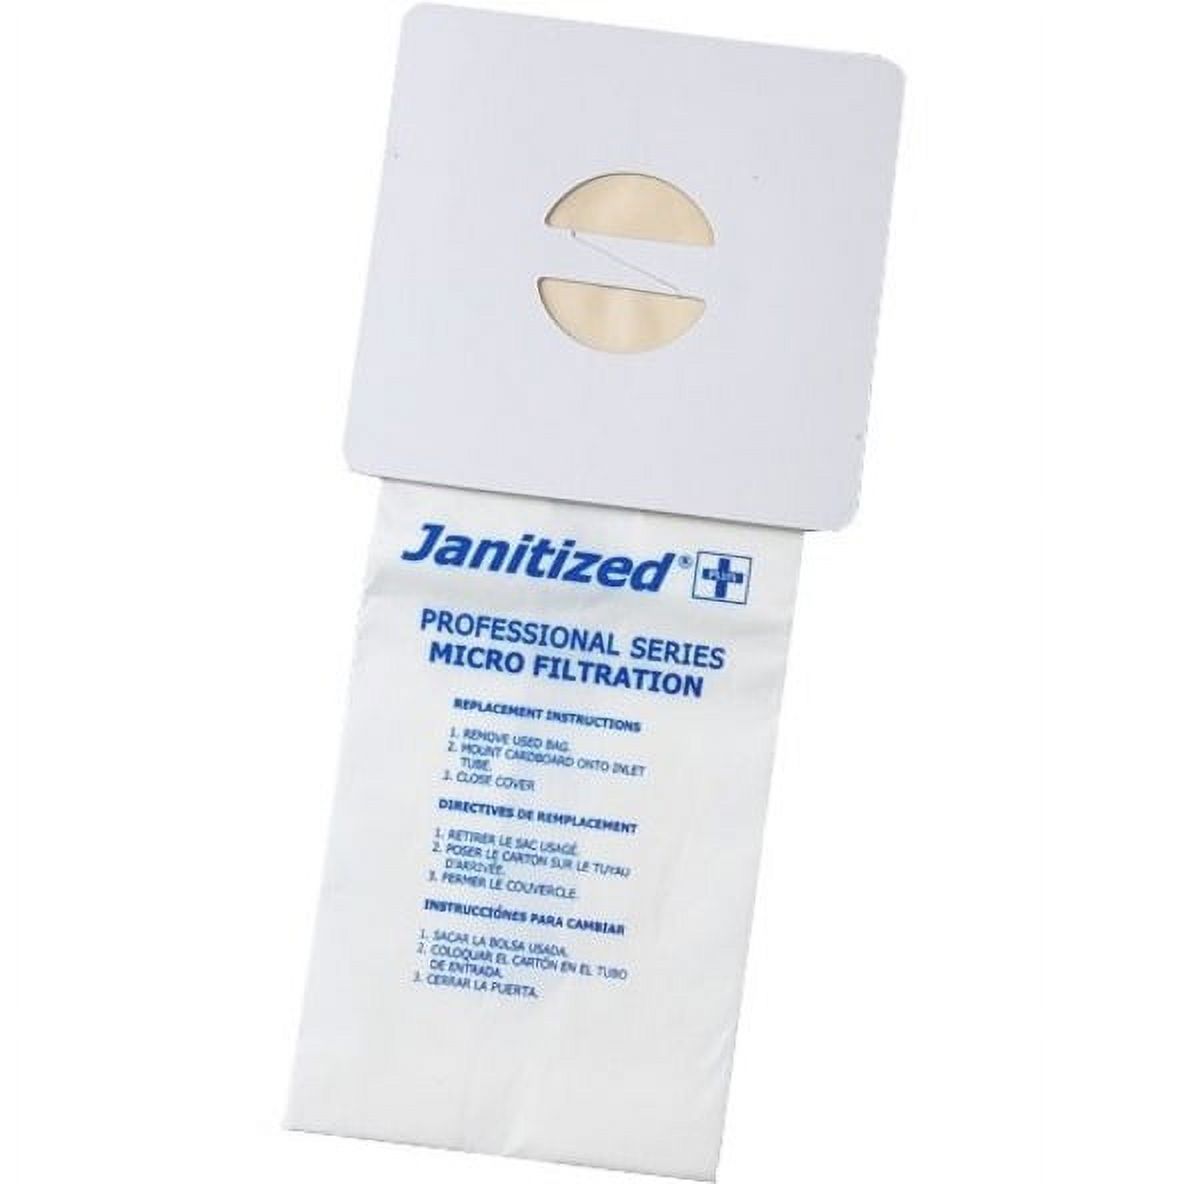 Janitized Replacement Vacuum Bag - image 1 of 2